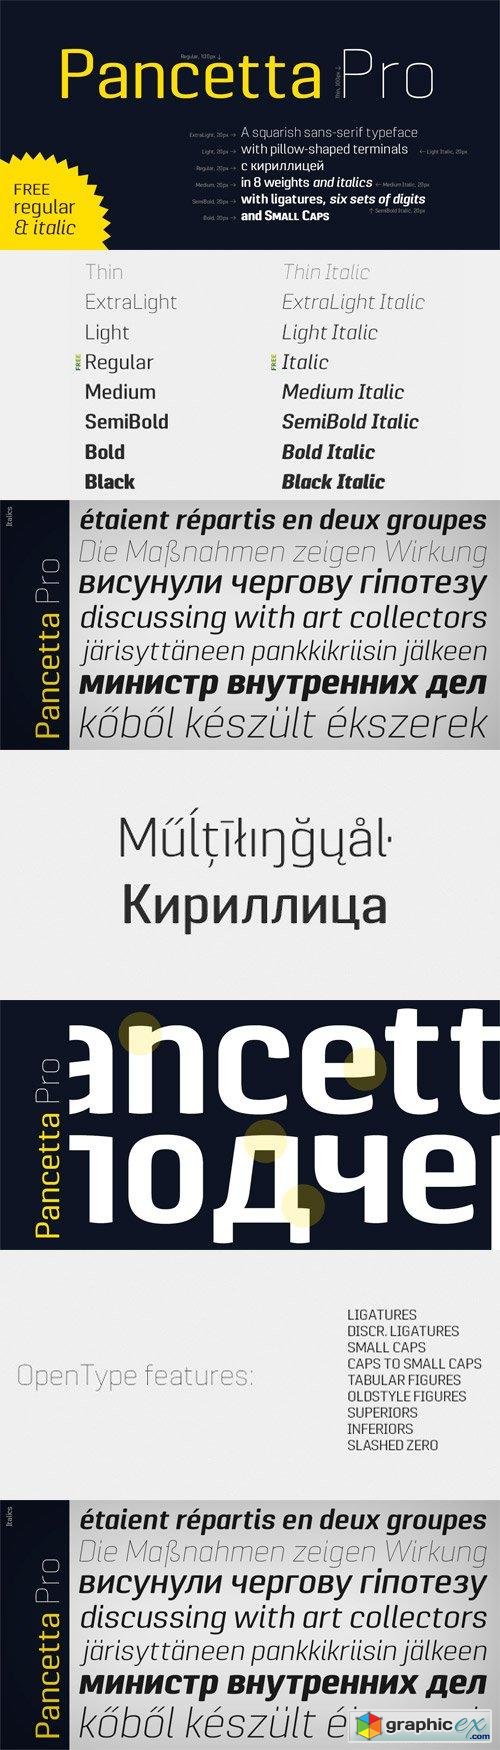 Pancetta Pro Font Family - 16 Fonts for $280